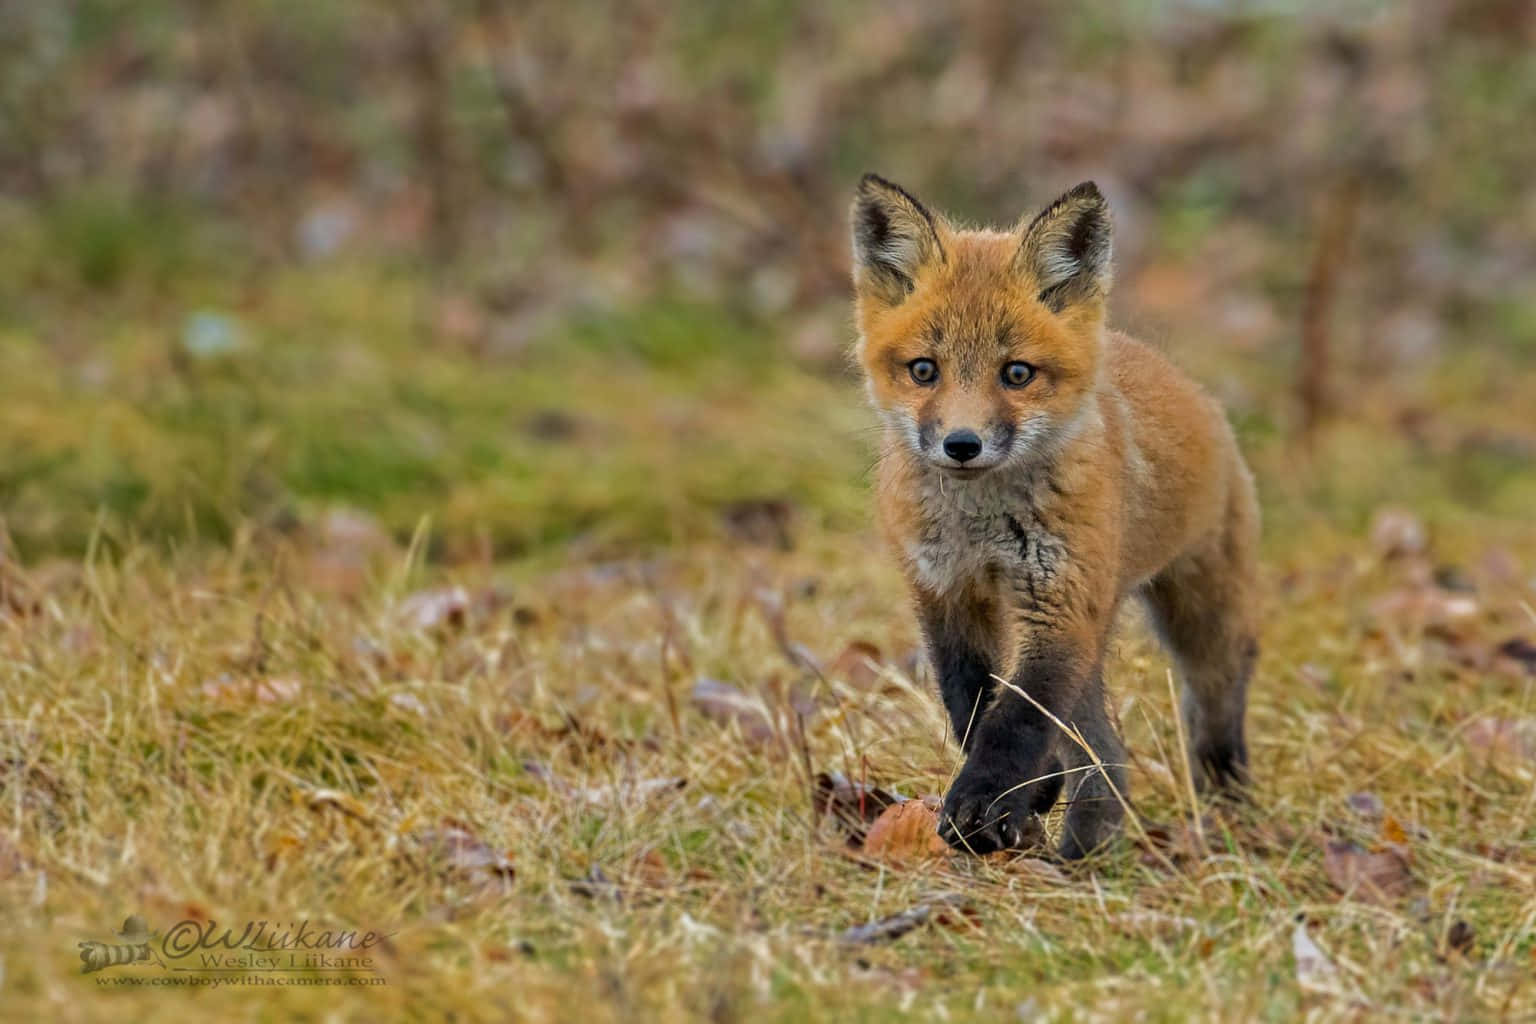 A cute fox peering out of the grass, curious about the world.